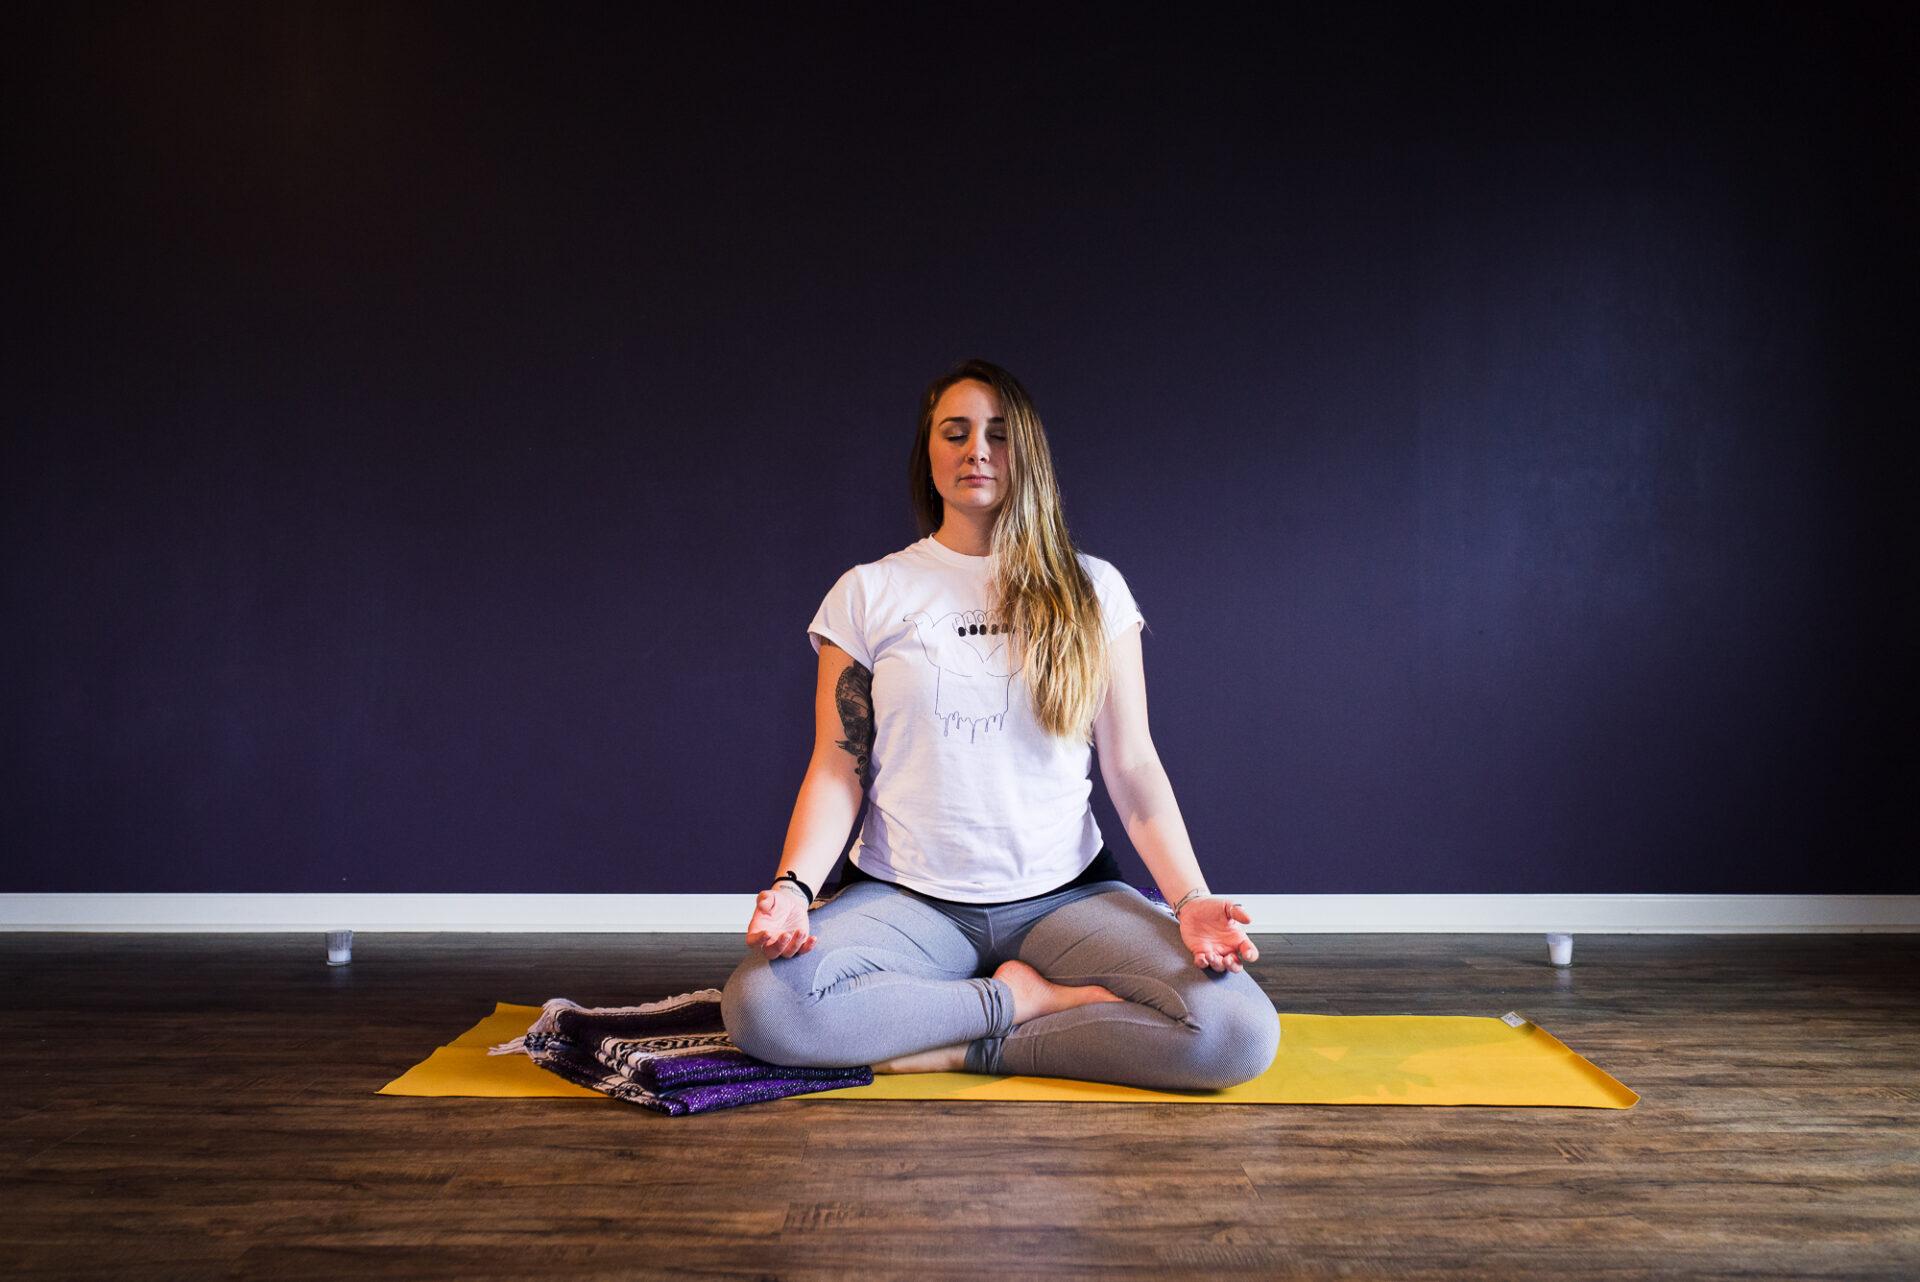 A woman on a yoga mat in athletic clothing in front of a purple wall in a meditation posture